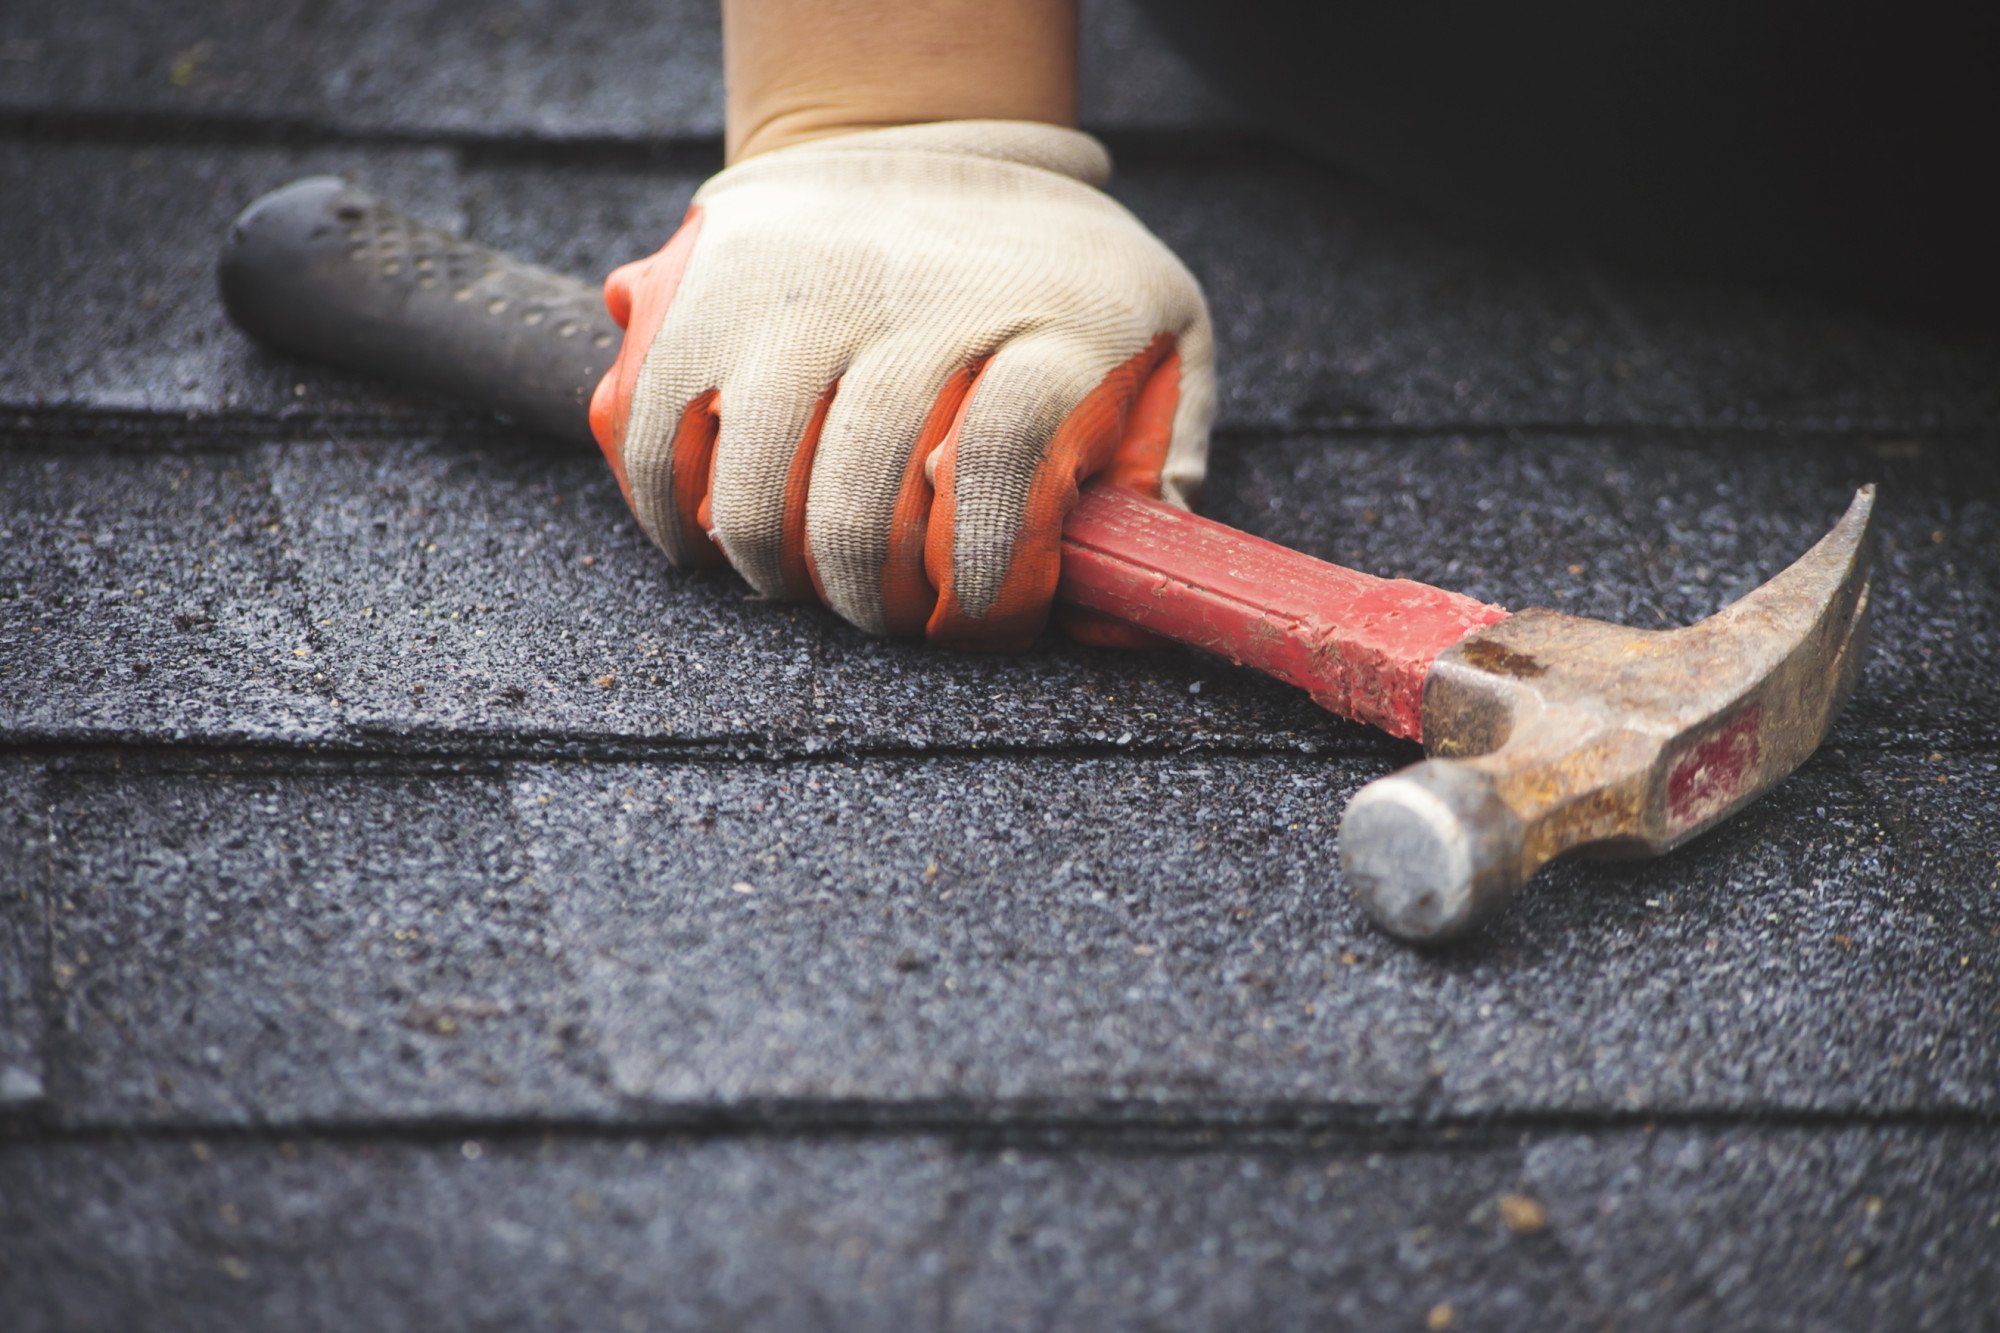 Are you wondering if your home needs urgent roof repairs? Click here for three telltale signs that you need to hire an emergency roof repair company.